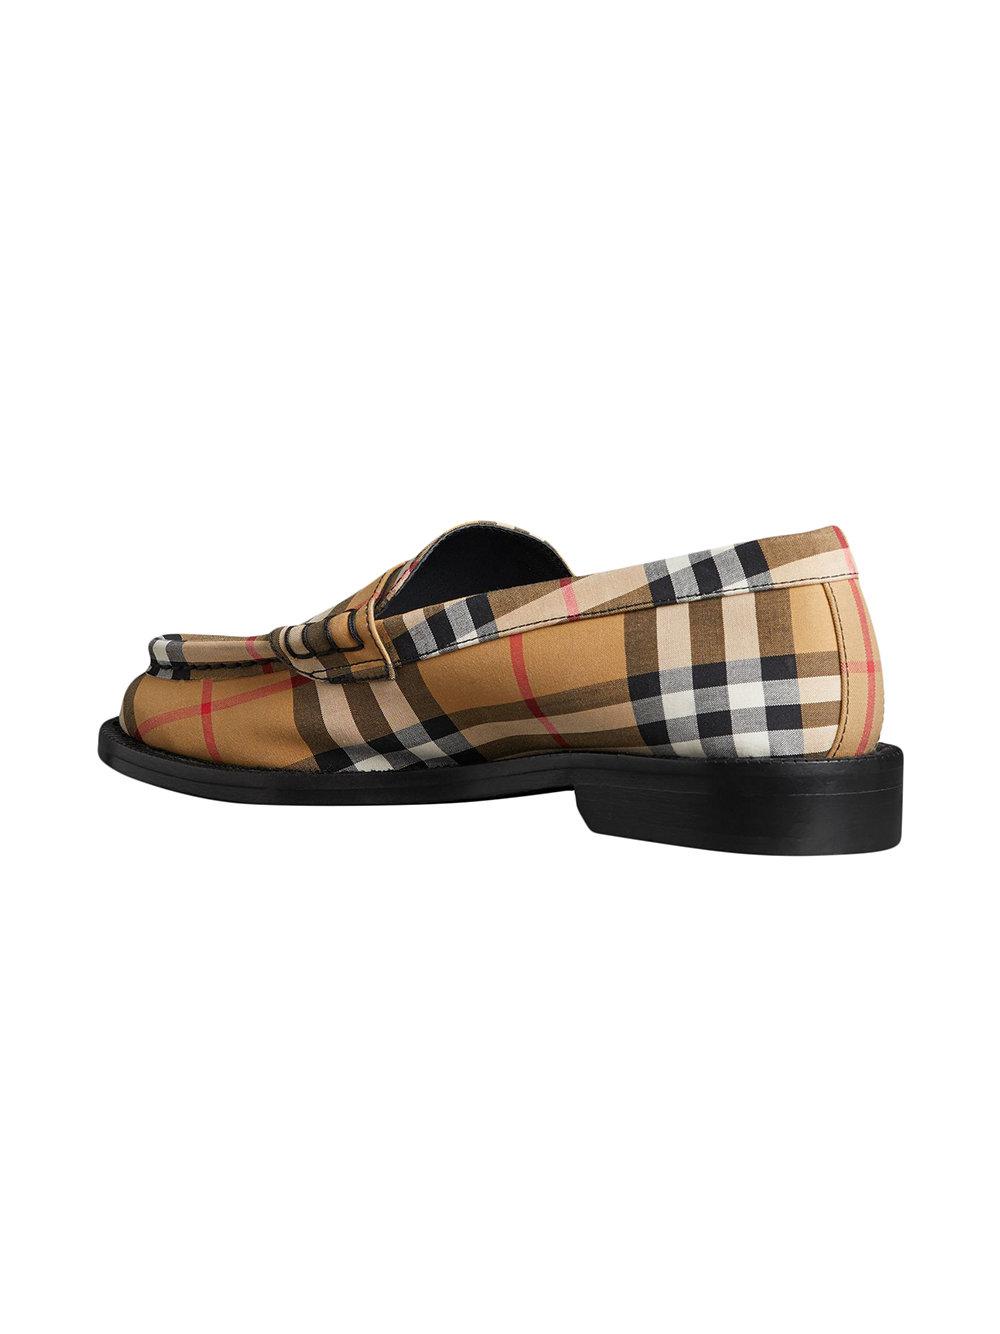 Burberry Vintage Check Cotton Penny Loafers for Men - Lyst